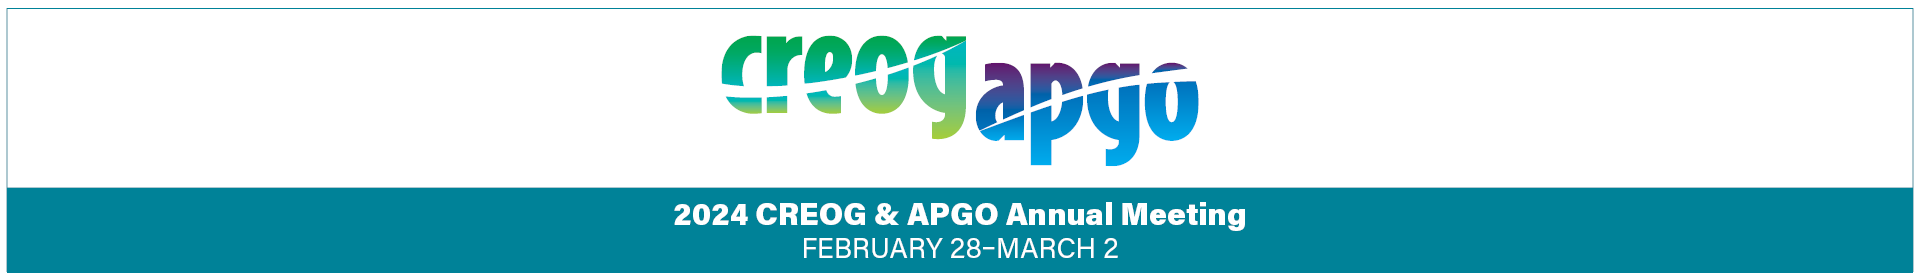 Submitter Login Page - Call for Abstracts - 2024 CREOG & APGO Annual